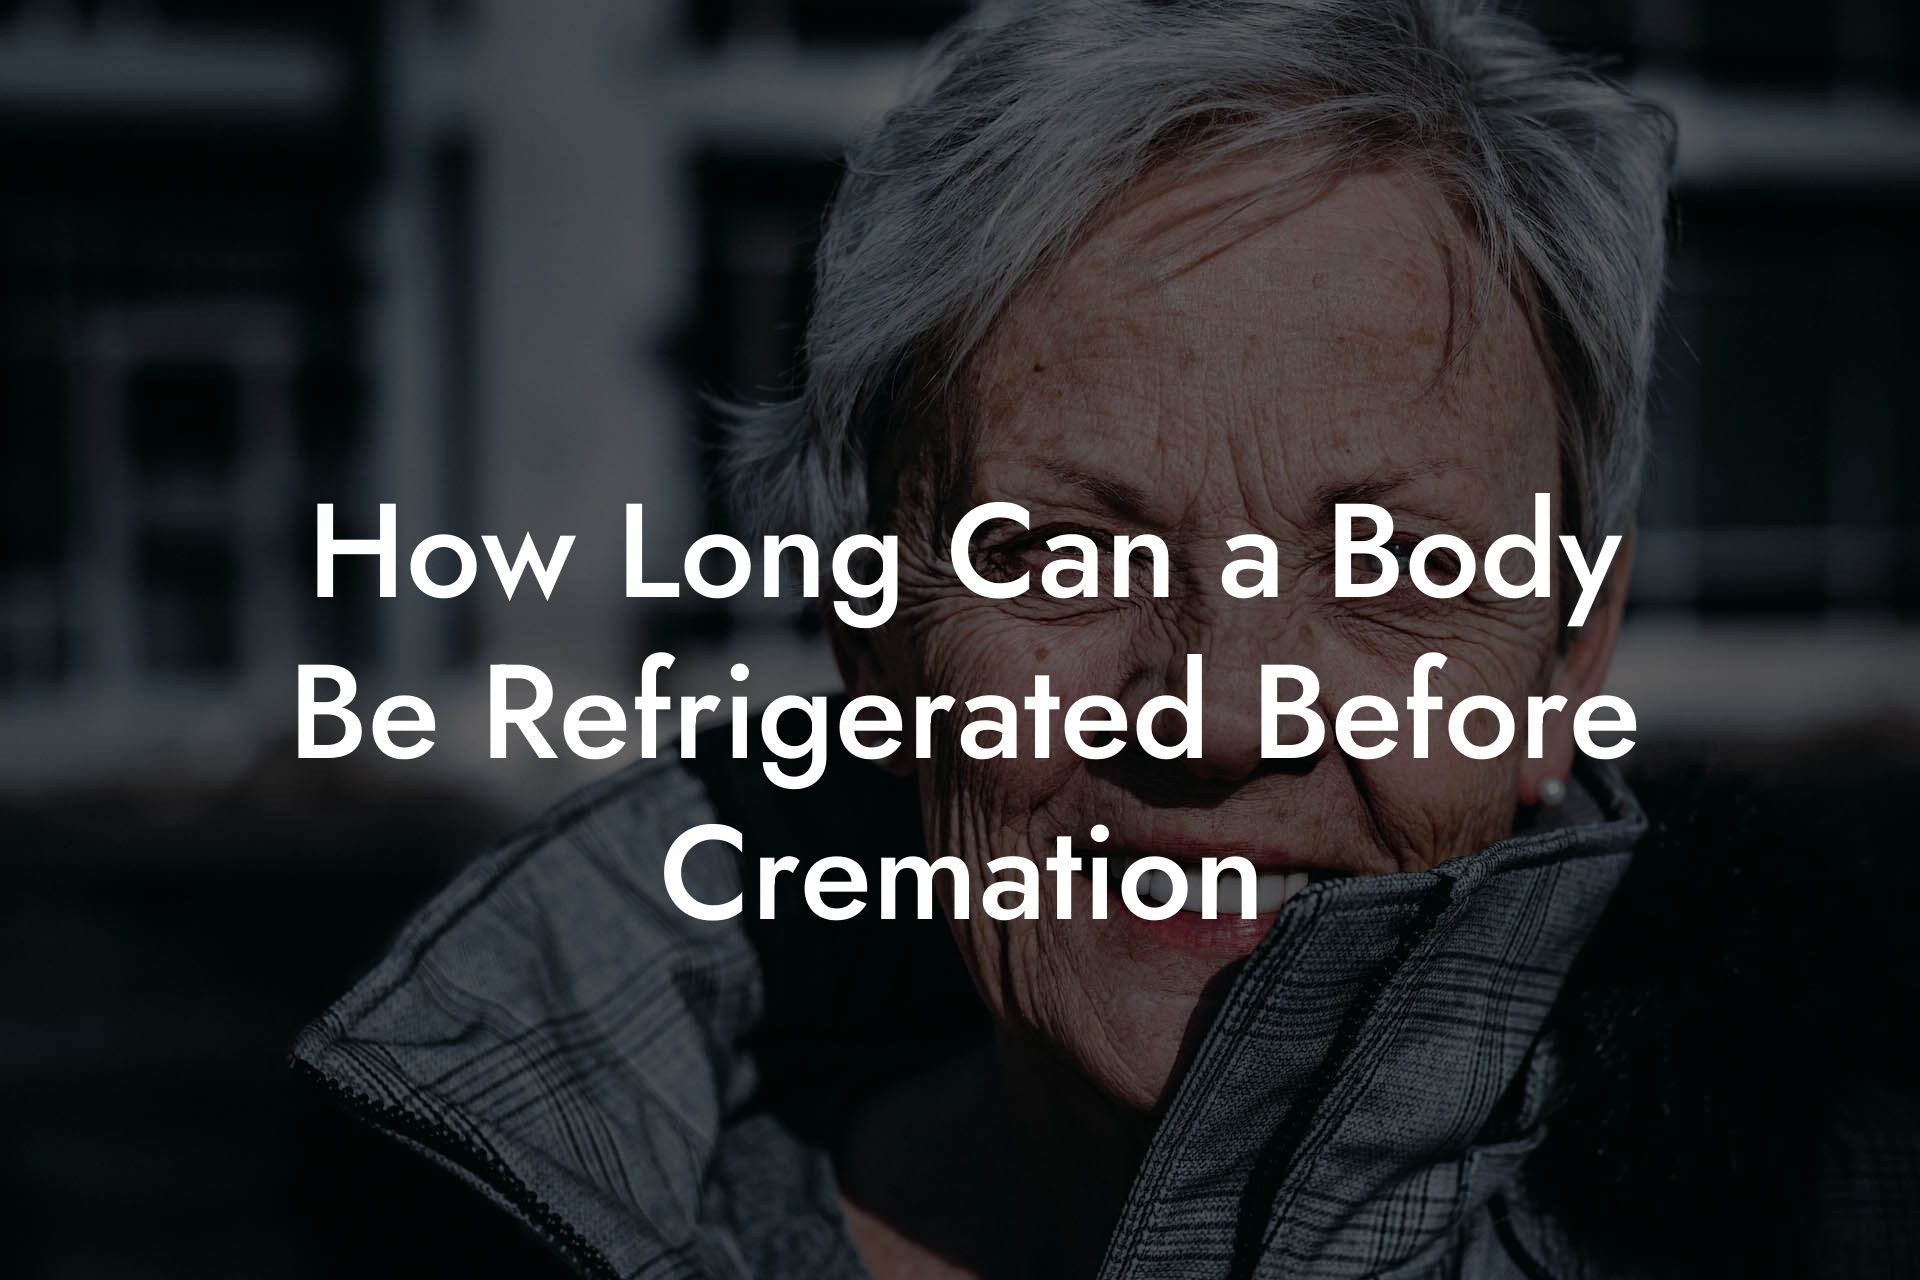 How Long Can a Body Be Refrigerated Before Cremation